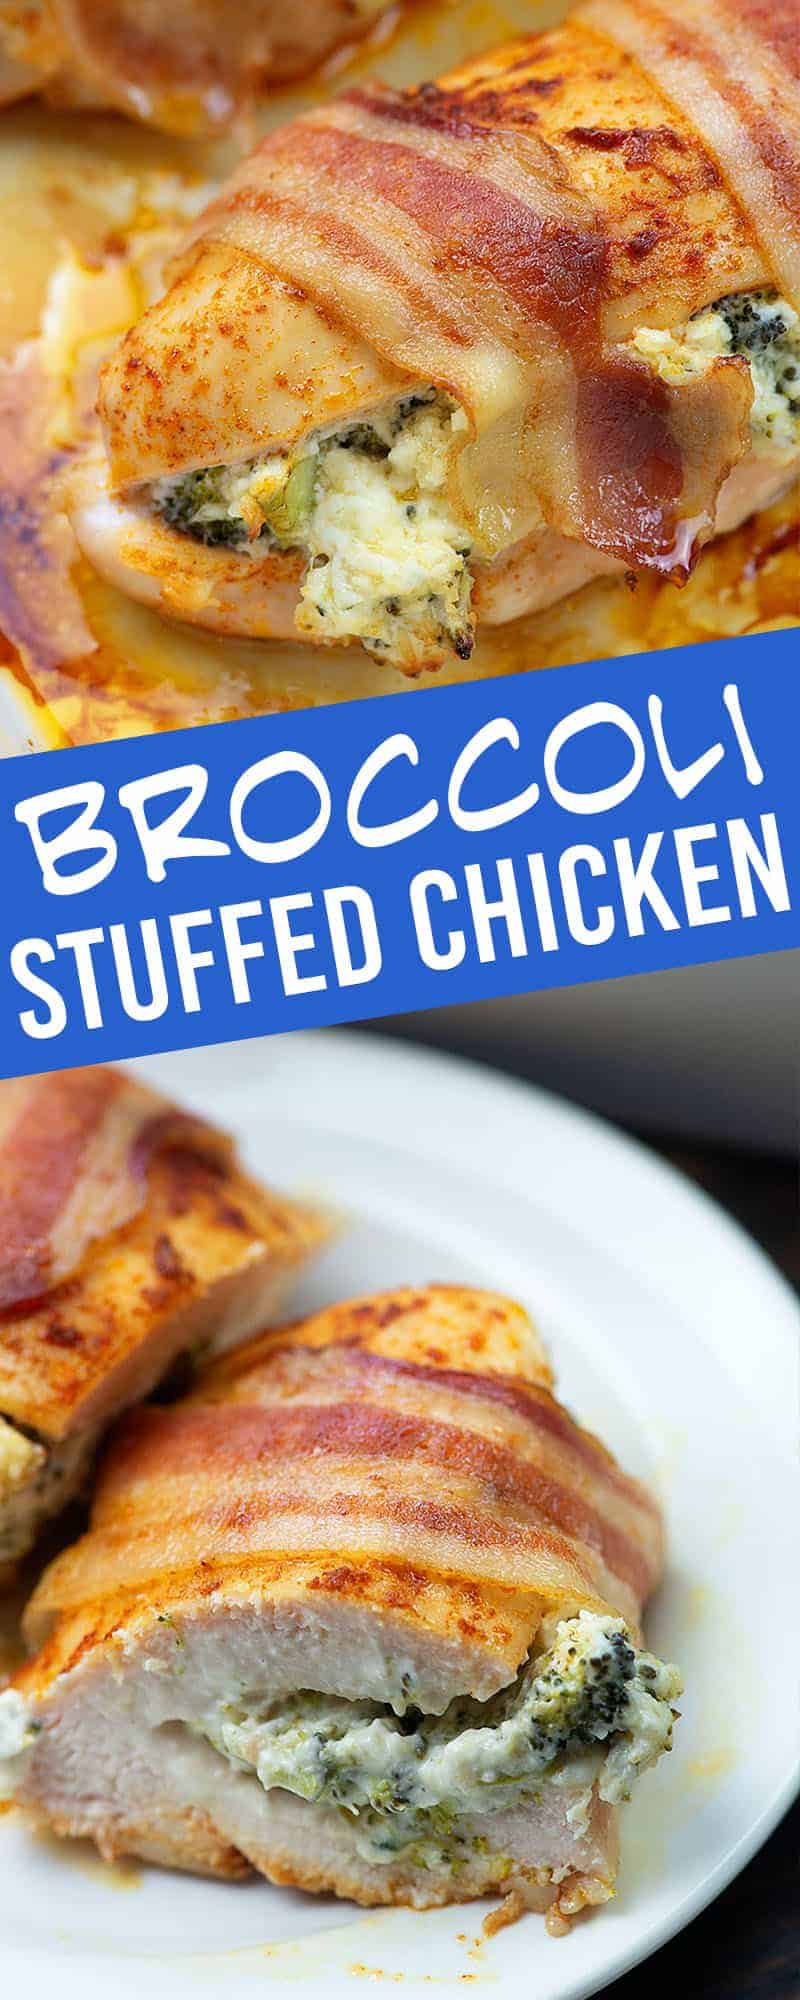 Broccoli and Cheese Stuffed Chicken | That Low Carb Life